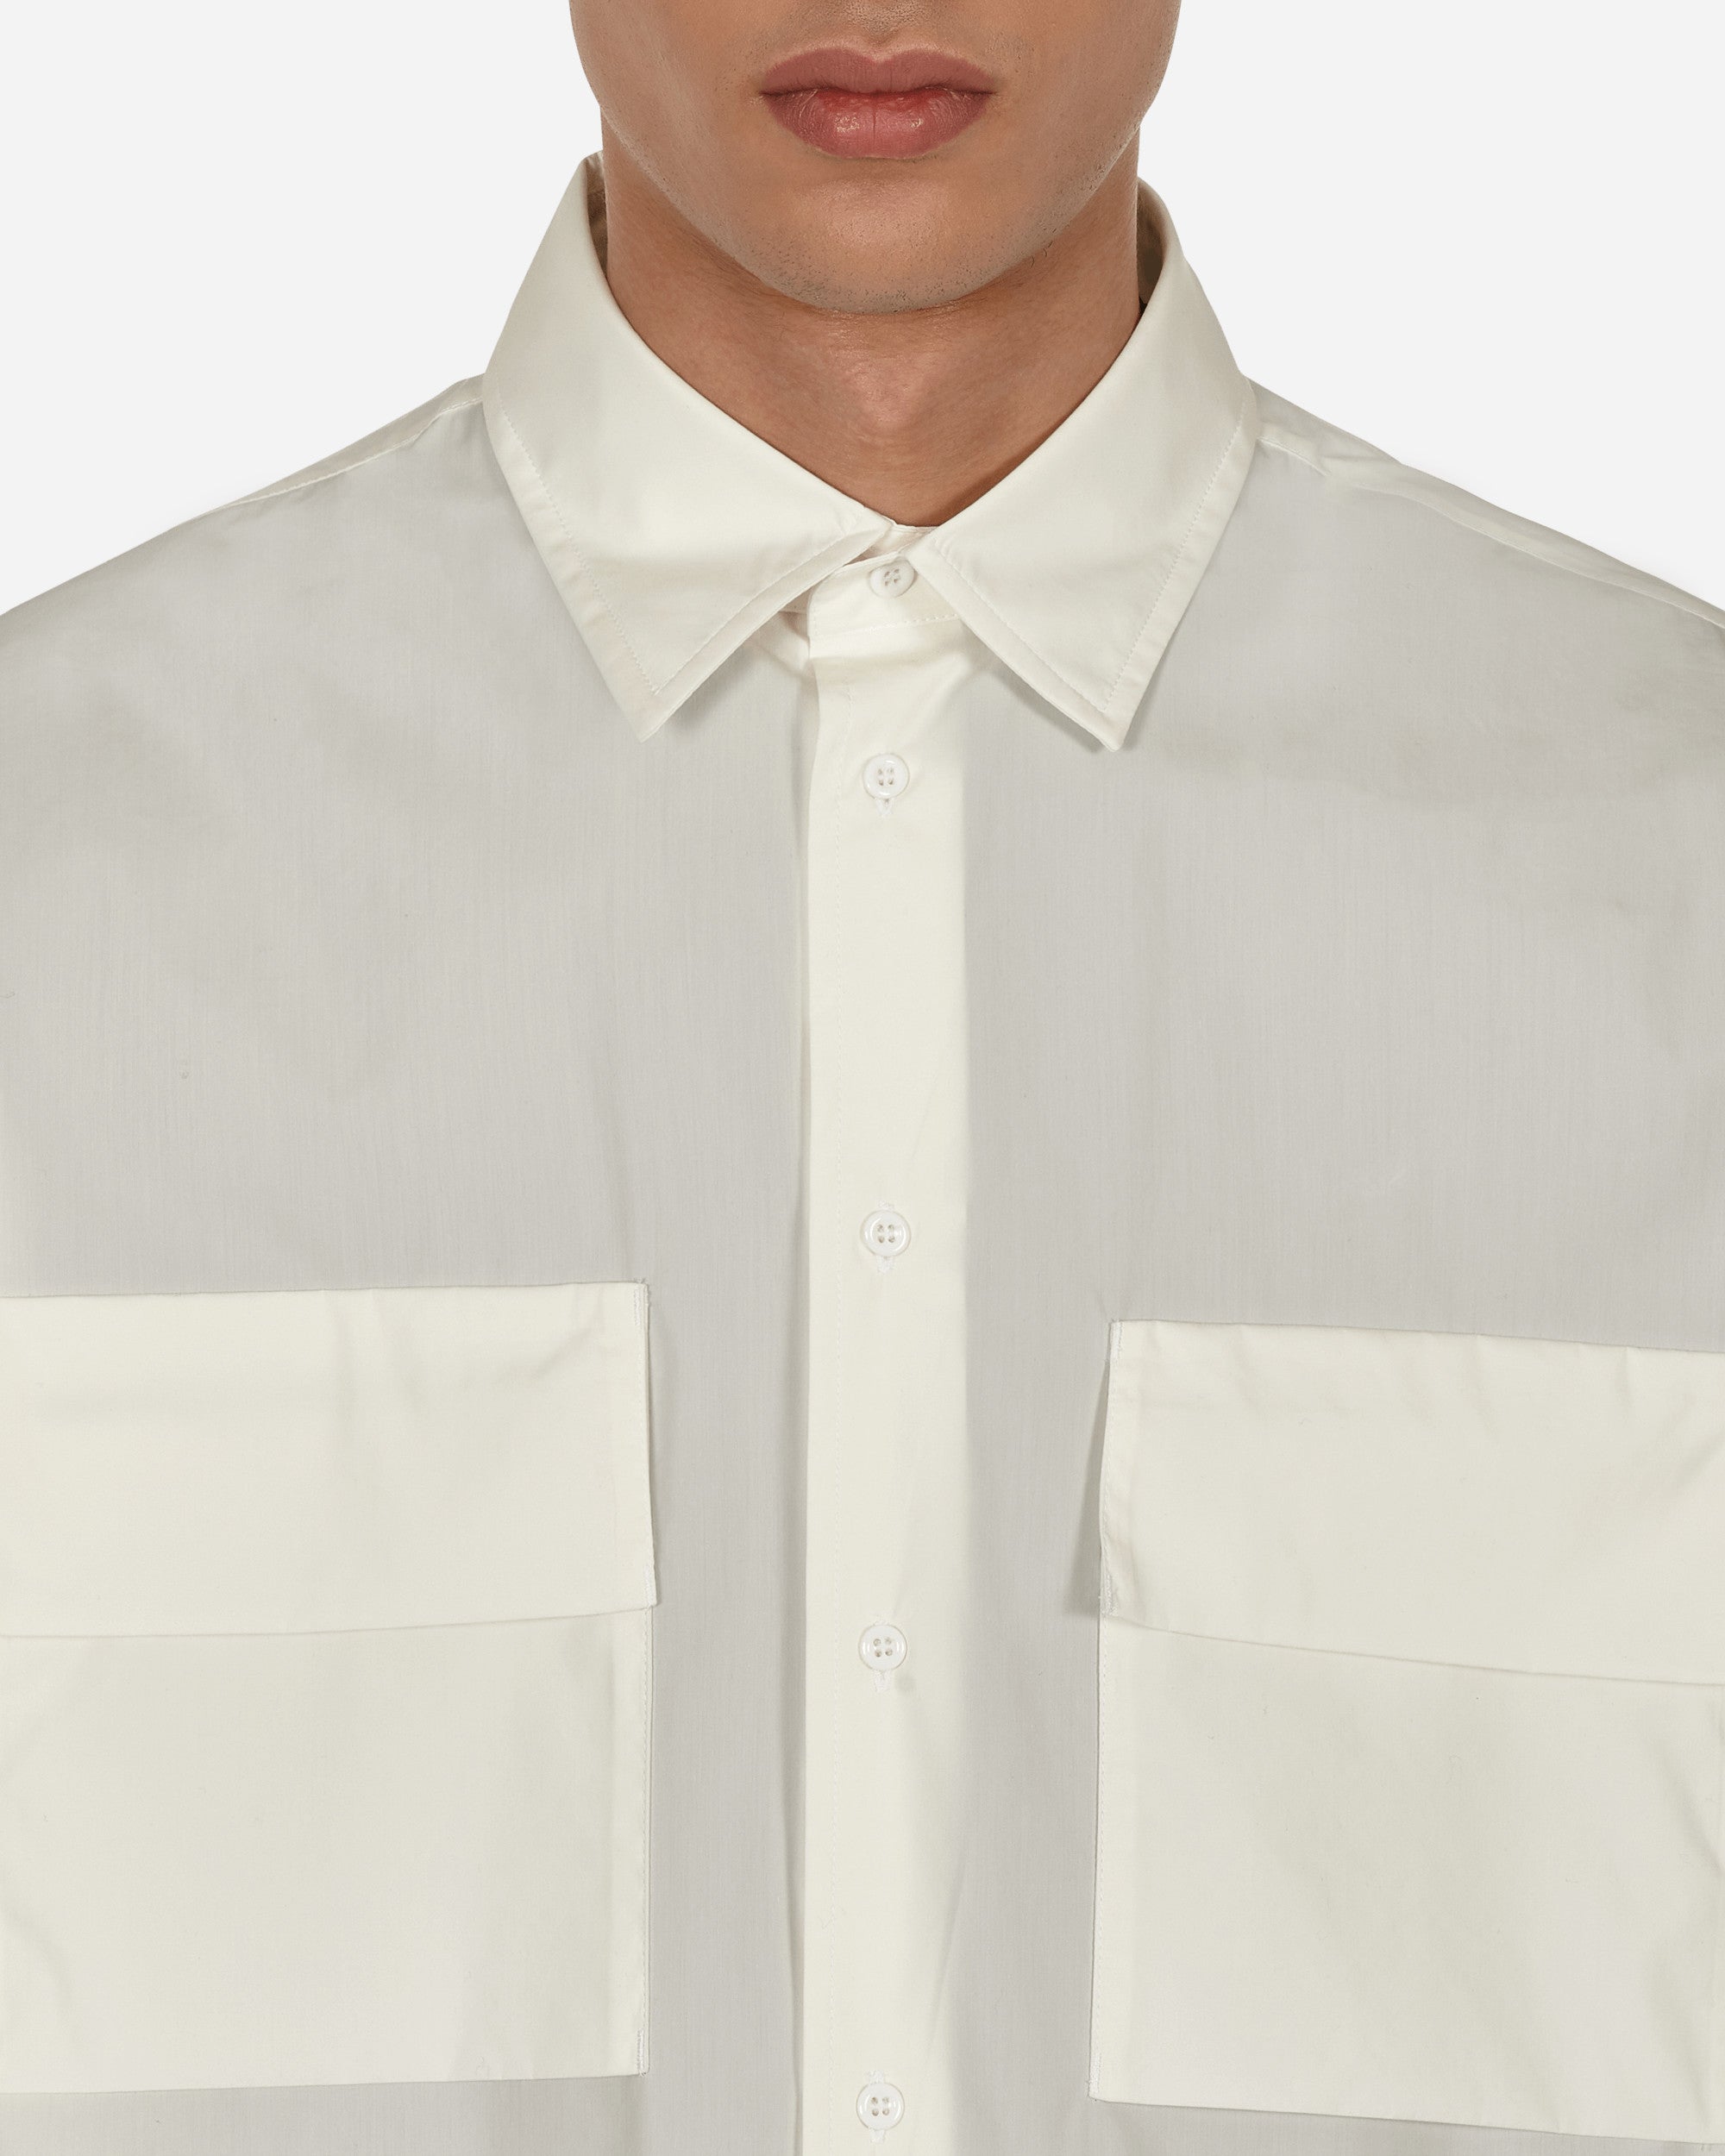 Nike Special Project Esc Woven Shirt White Shirts Shortsleeve DN4096-100